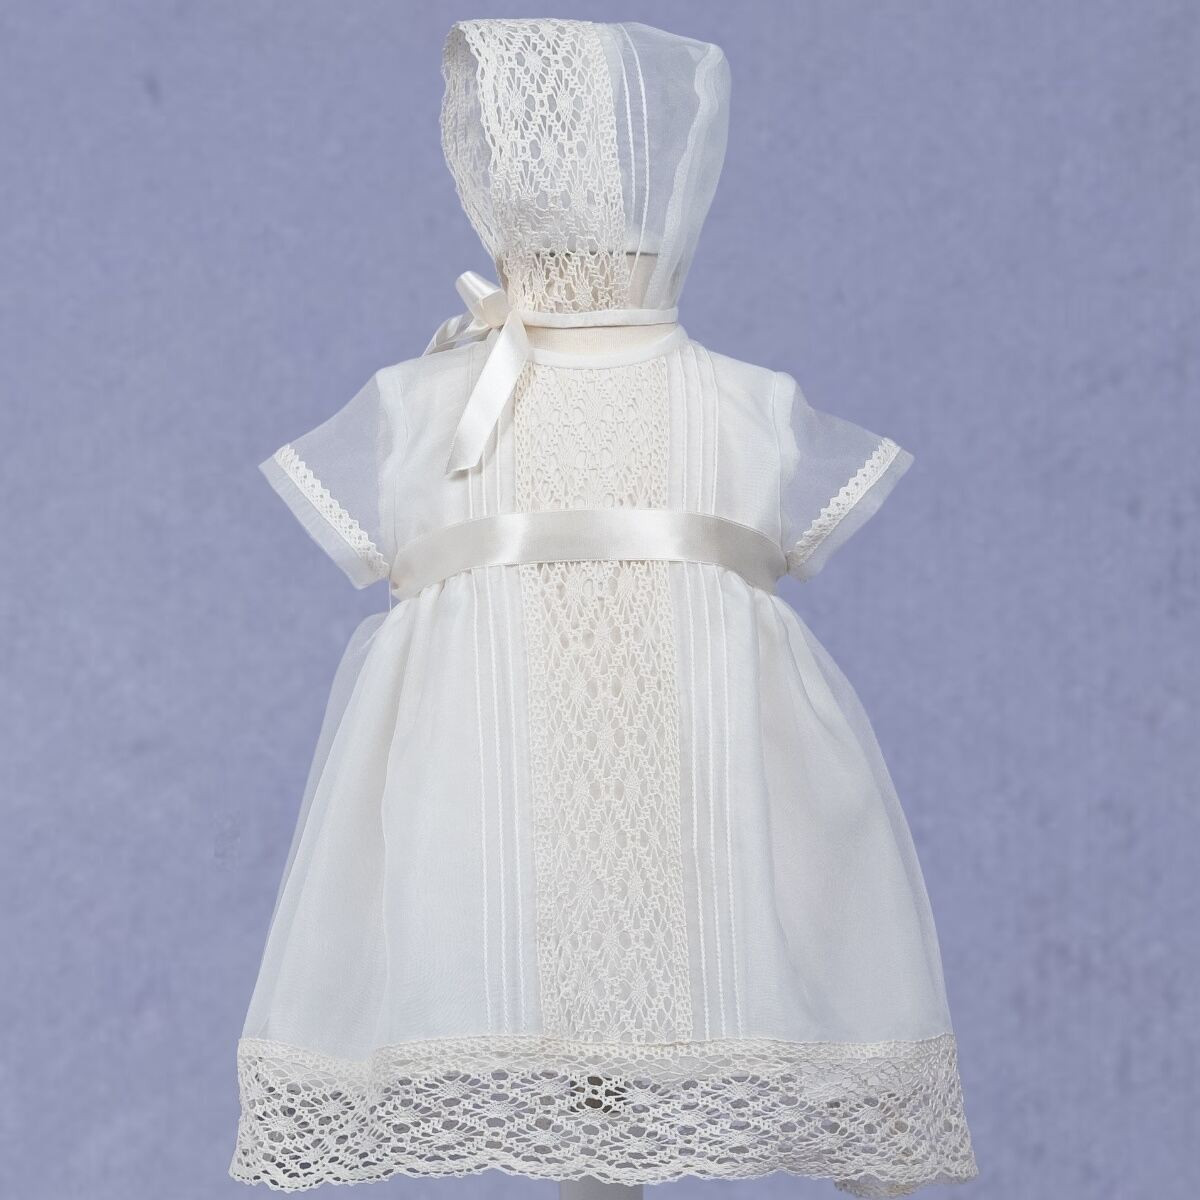 GIRLS CERMONIAL DRESS WITH LACE MISHA BABY - 3